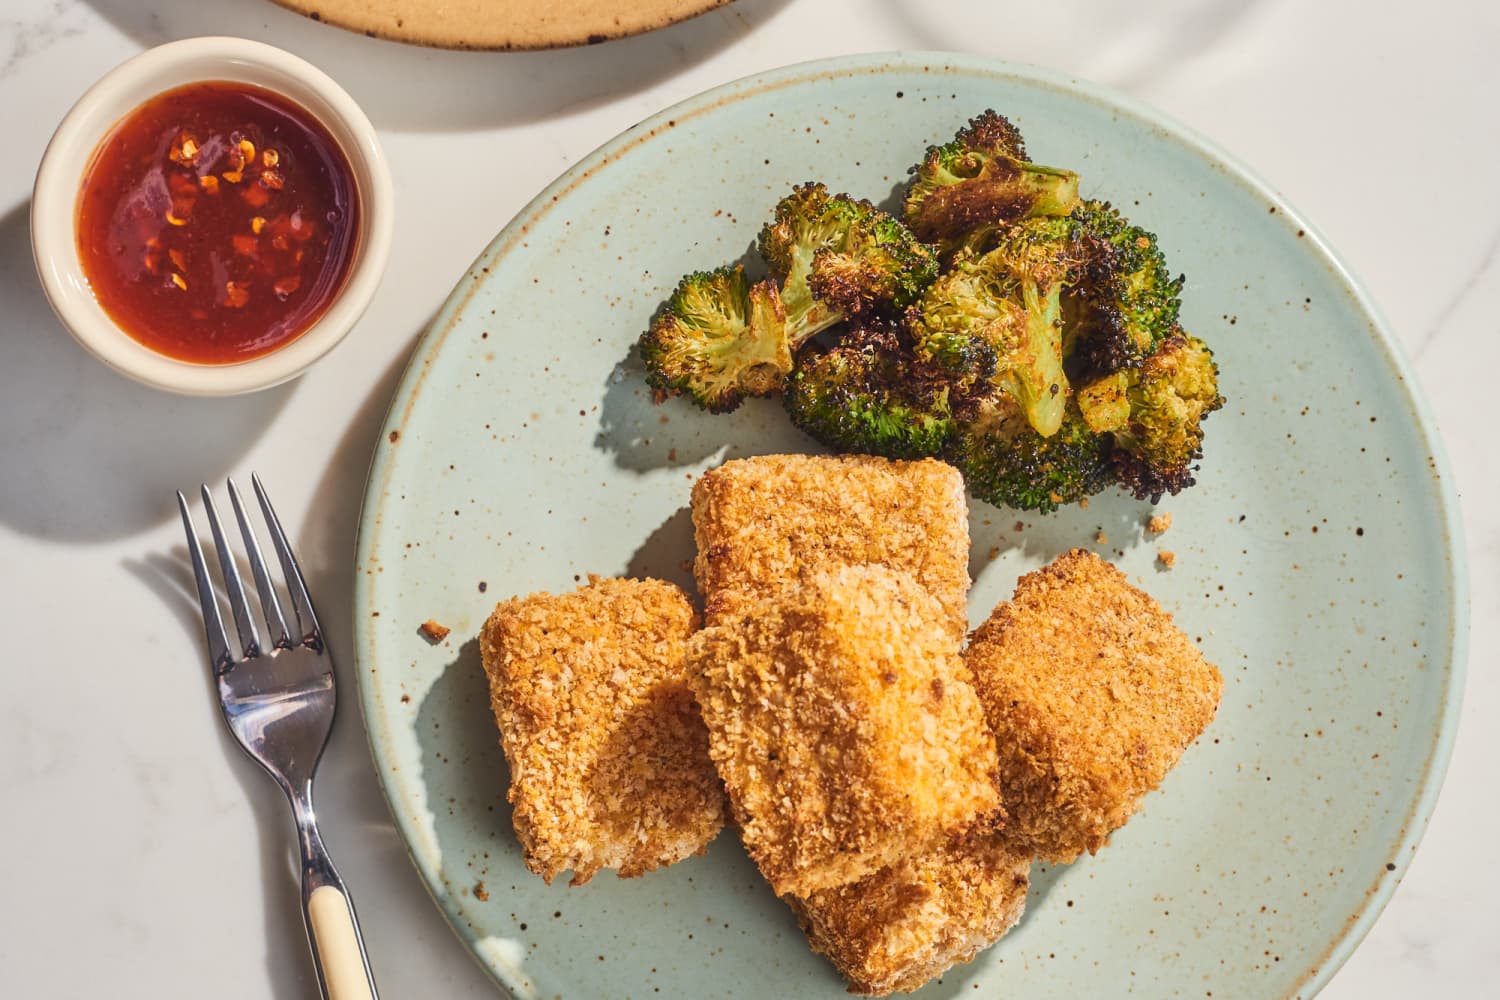 Crispy Air Fryer Tofu Nuggets Are a Meatless Monday Win